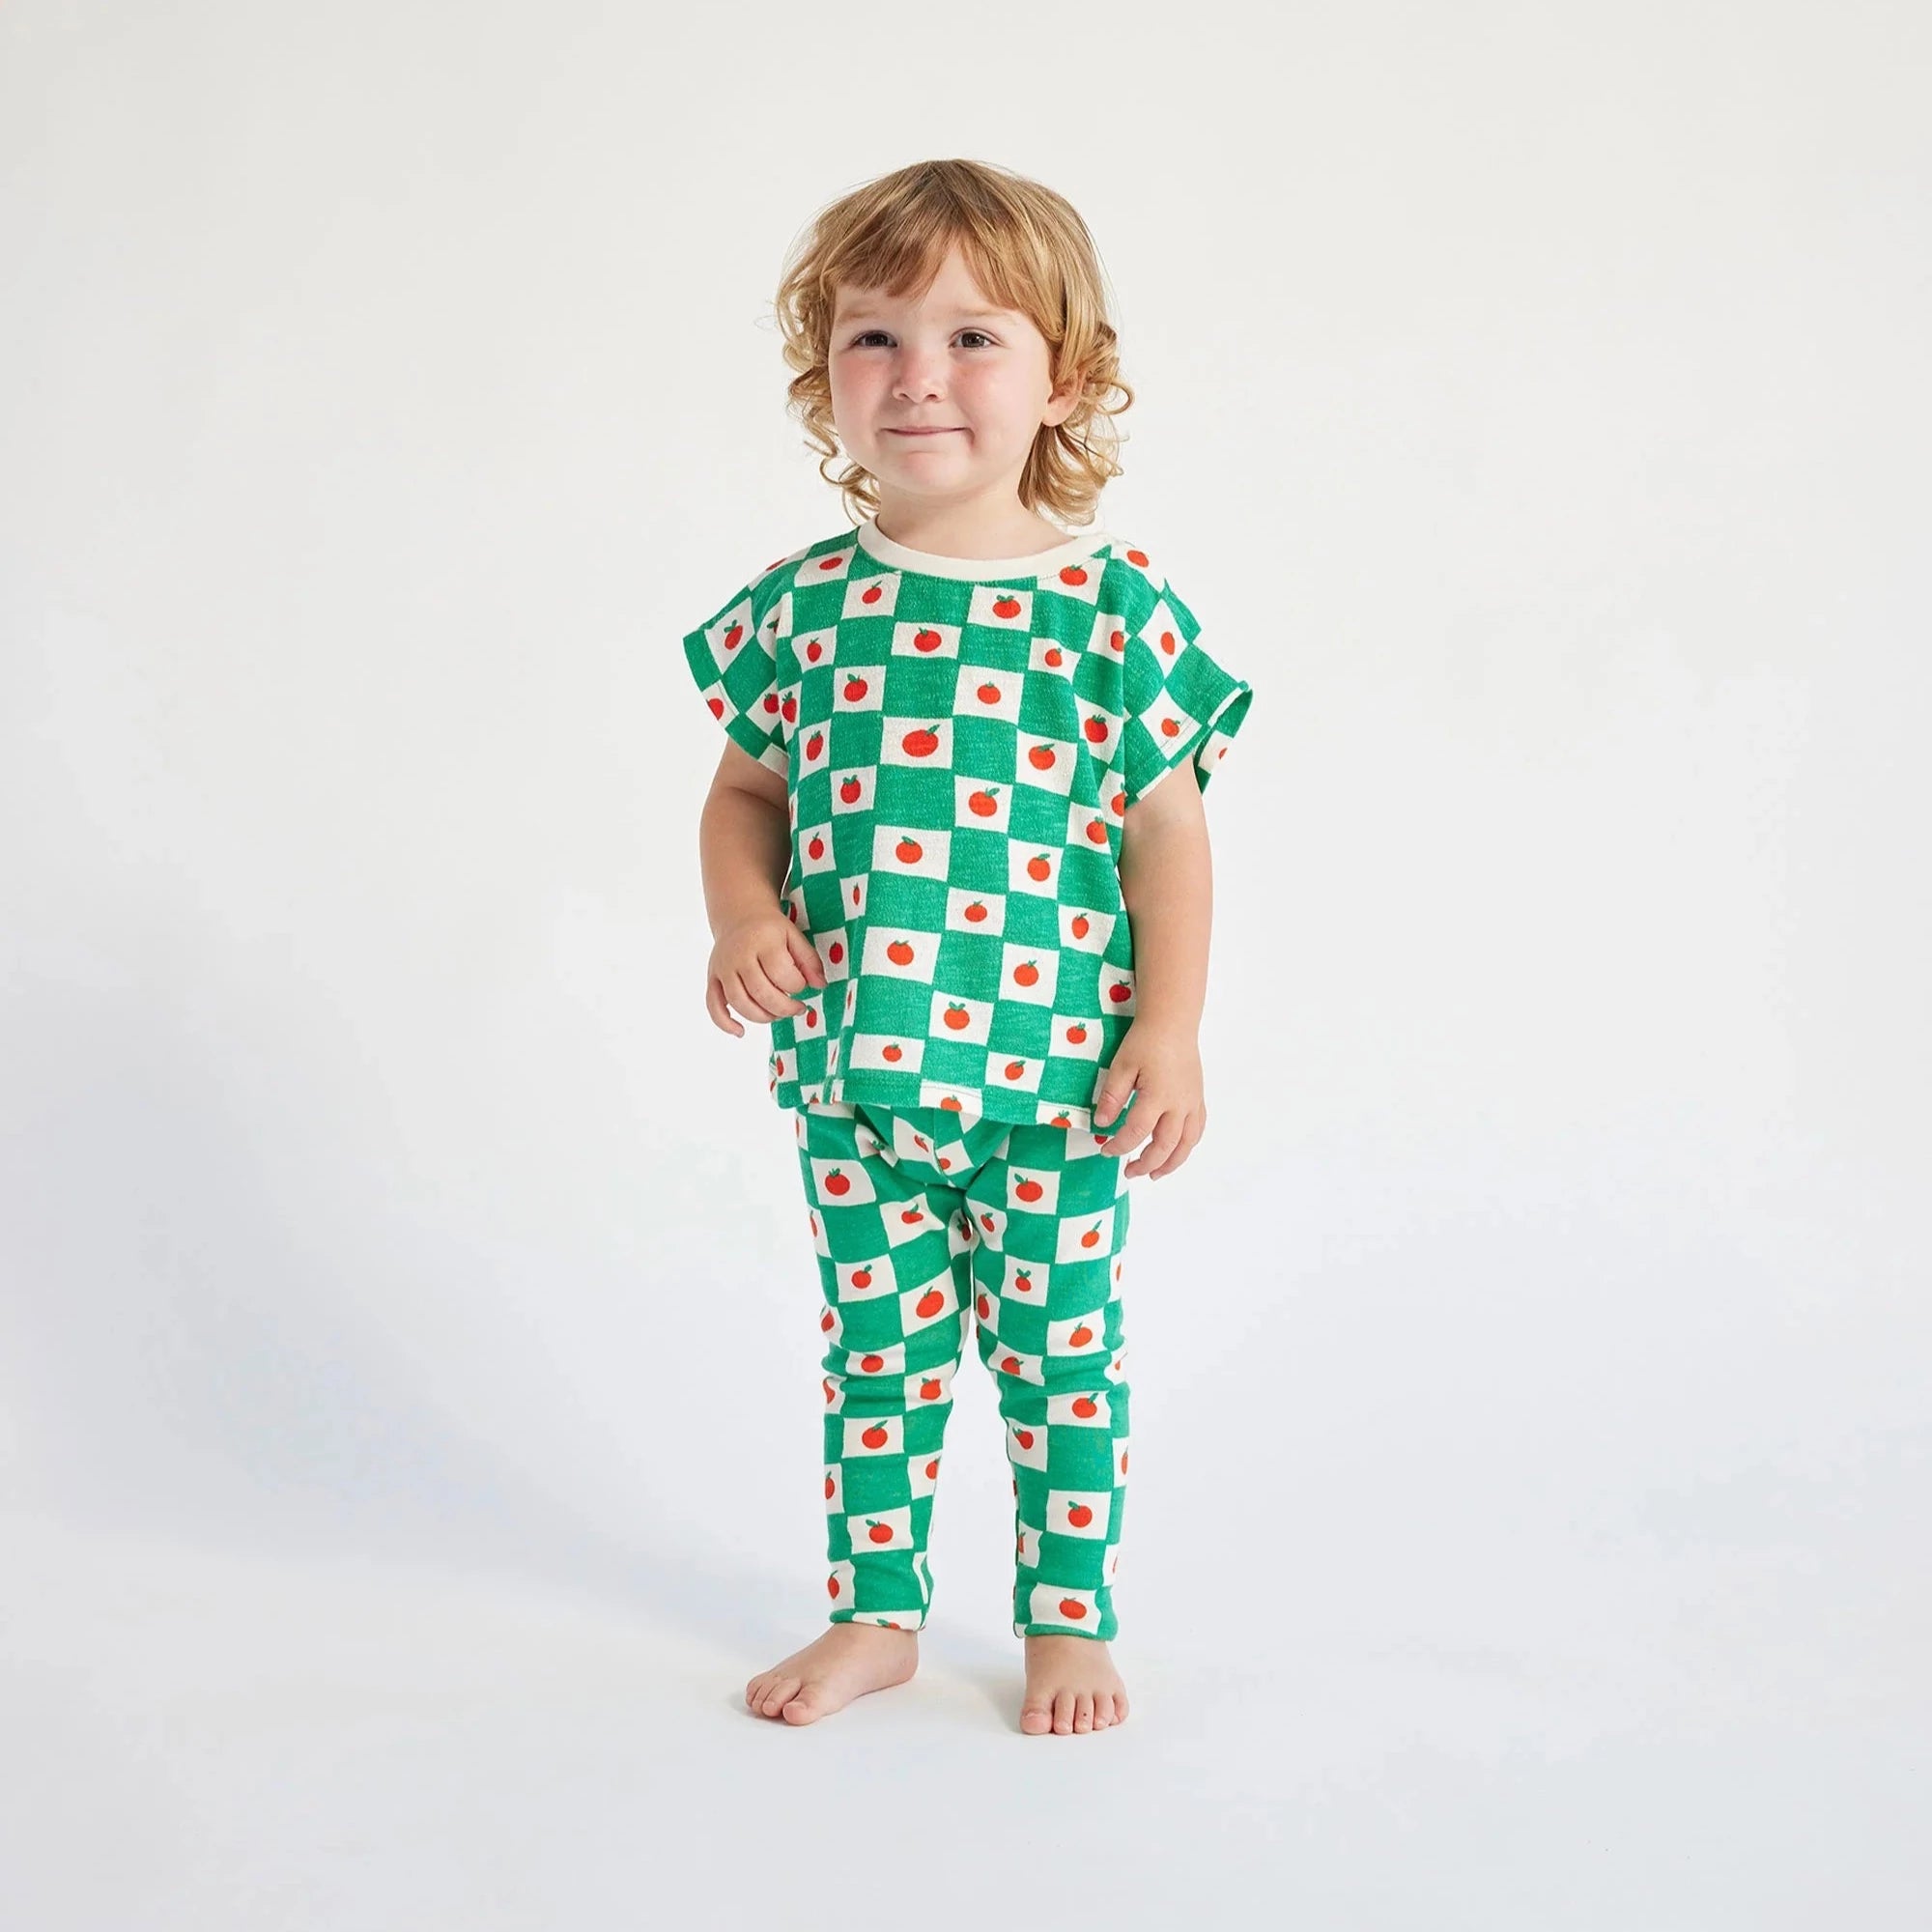 child wearing green and white checked t-shirt with tomato print